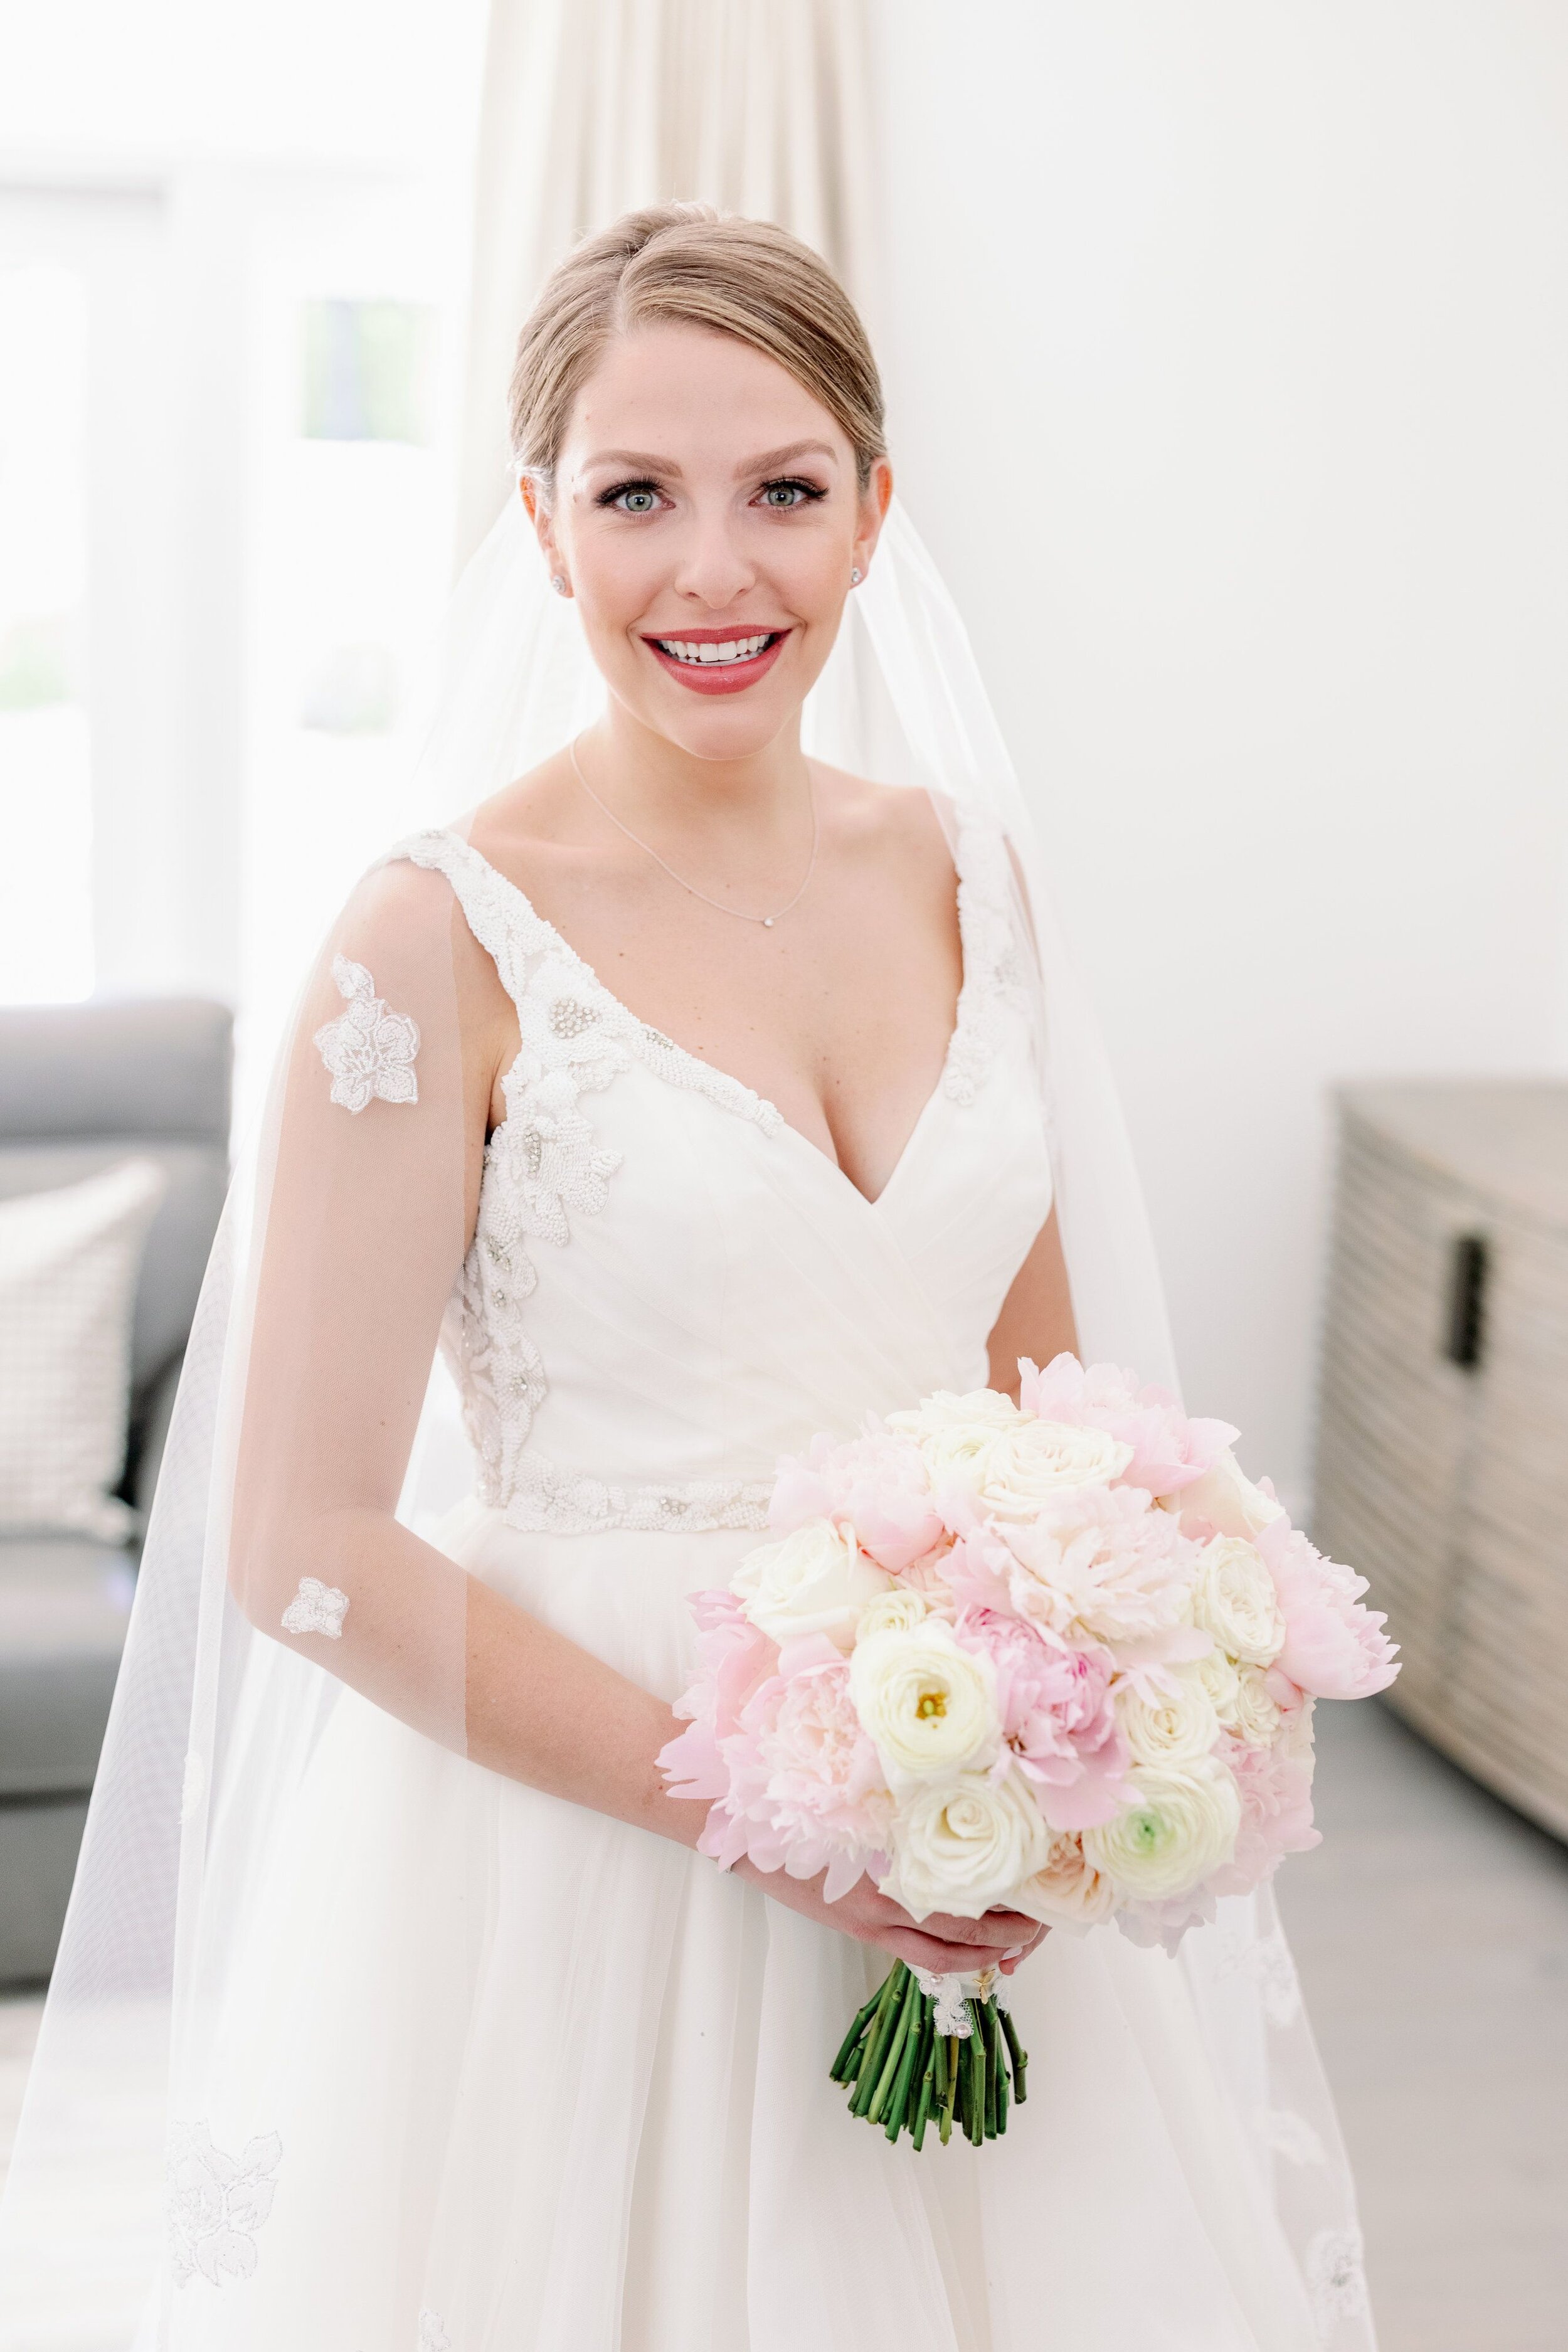 Bride in Wedding Dress Holding White and Blush Bouquet.jpeg